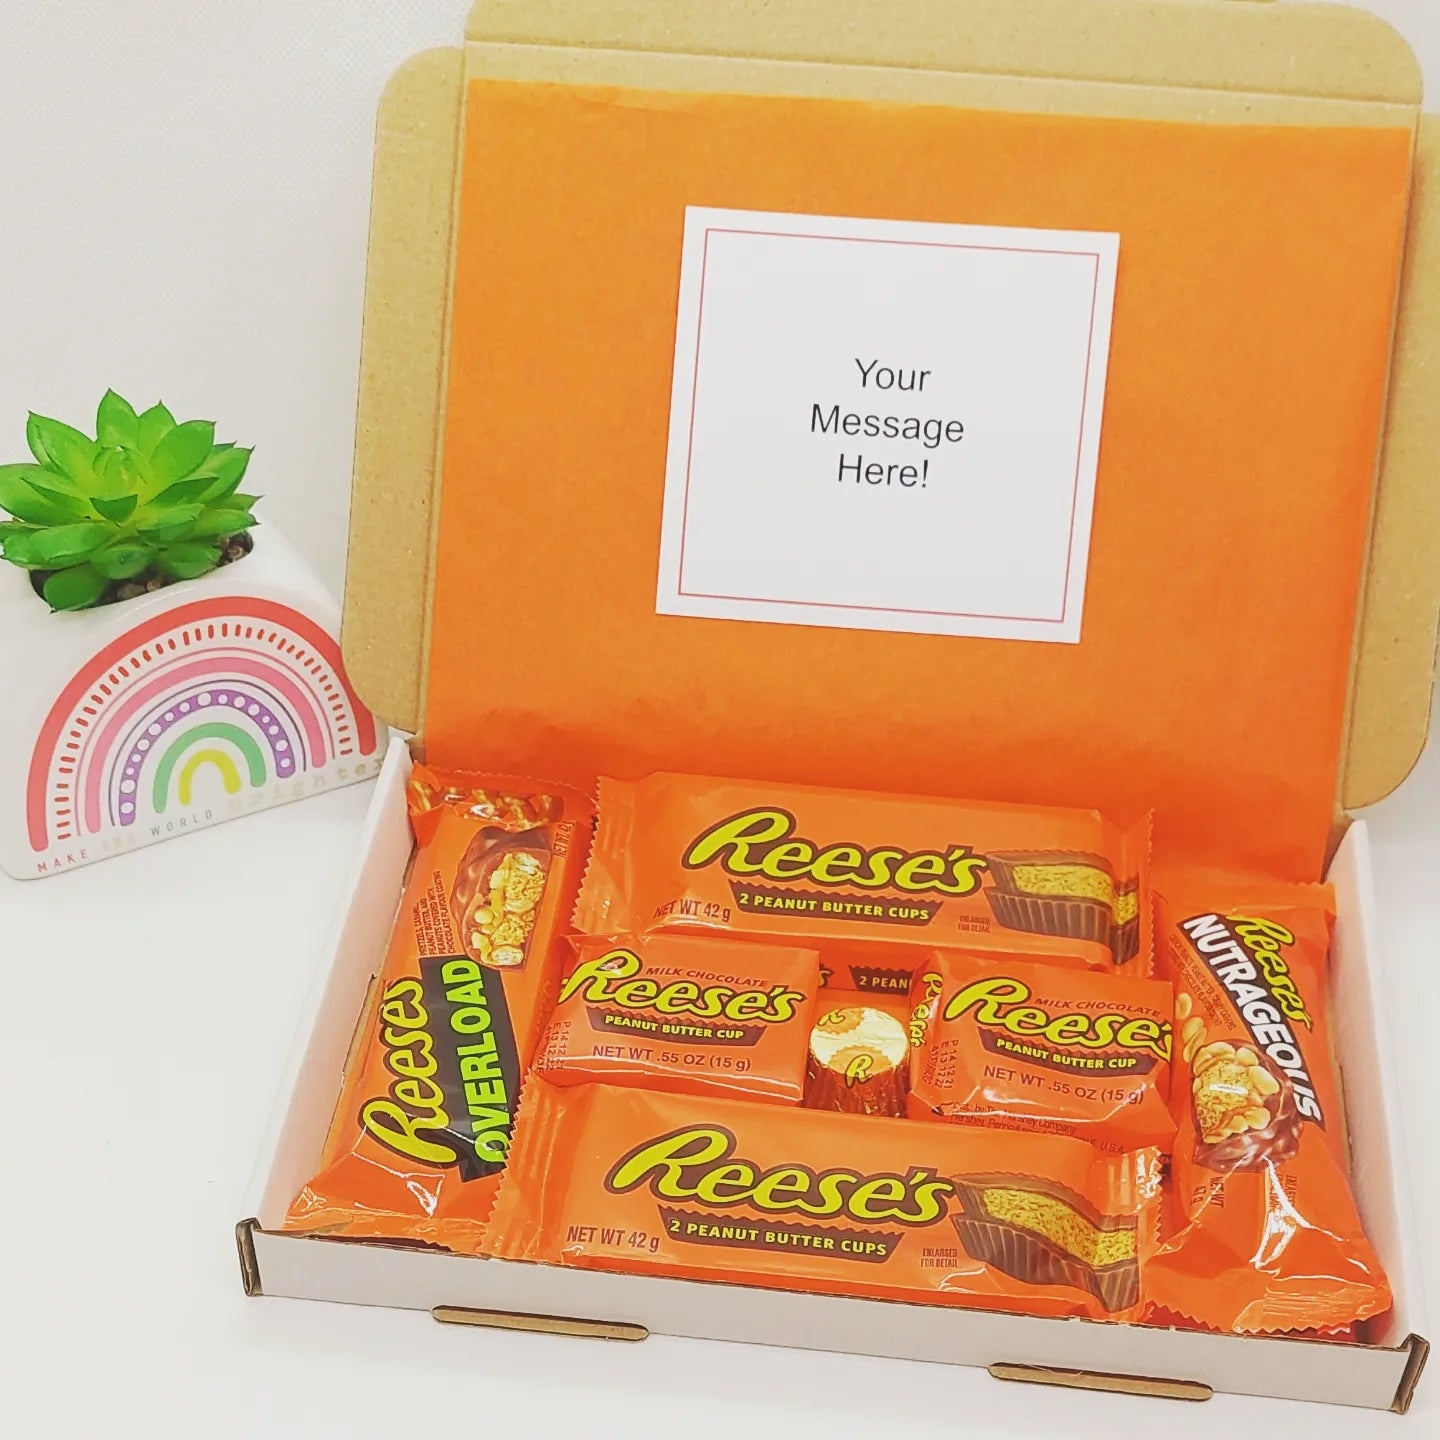 Reese’s Chocolate Letterbox Gift – The Happiness Box